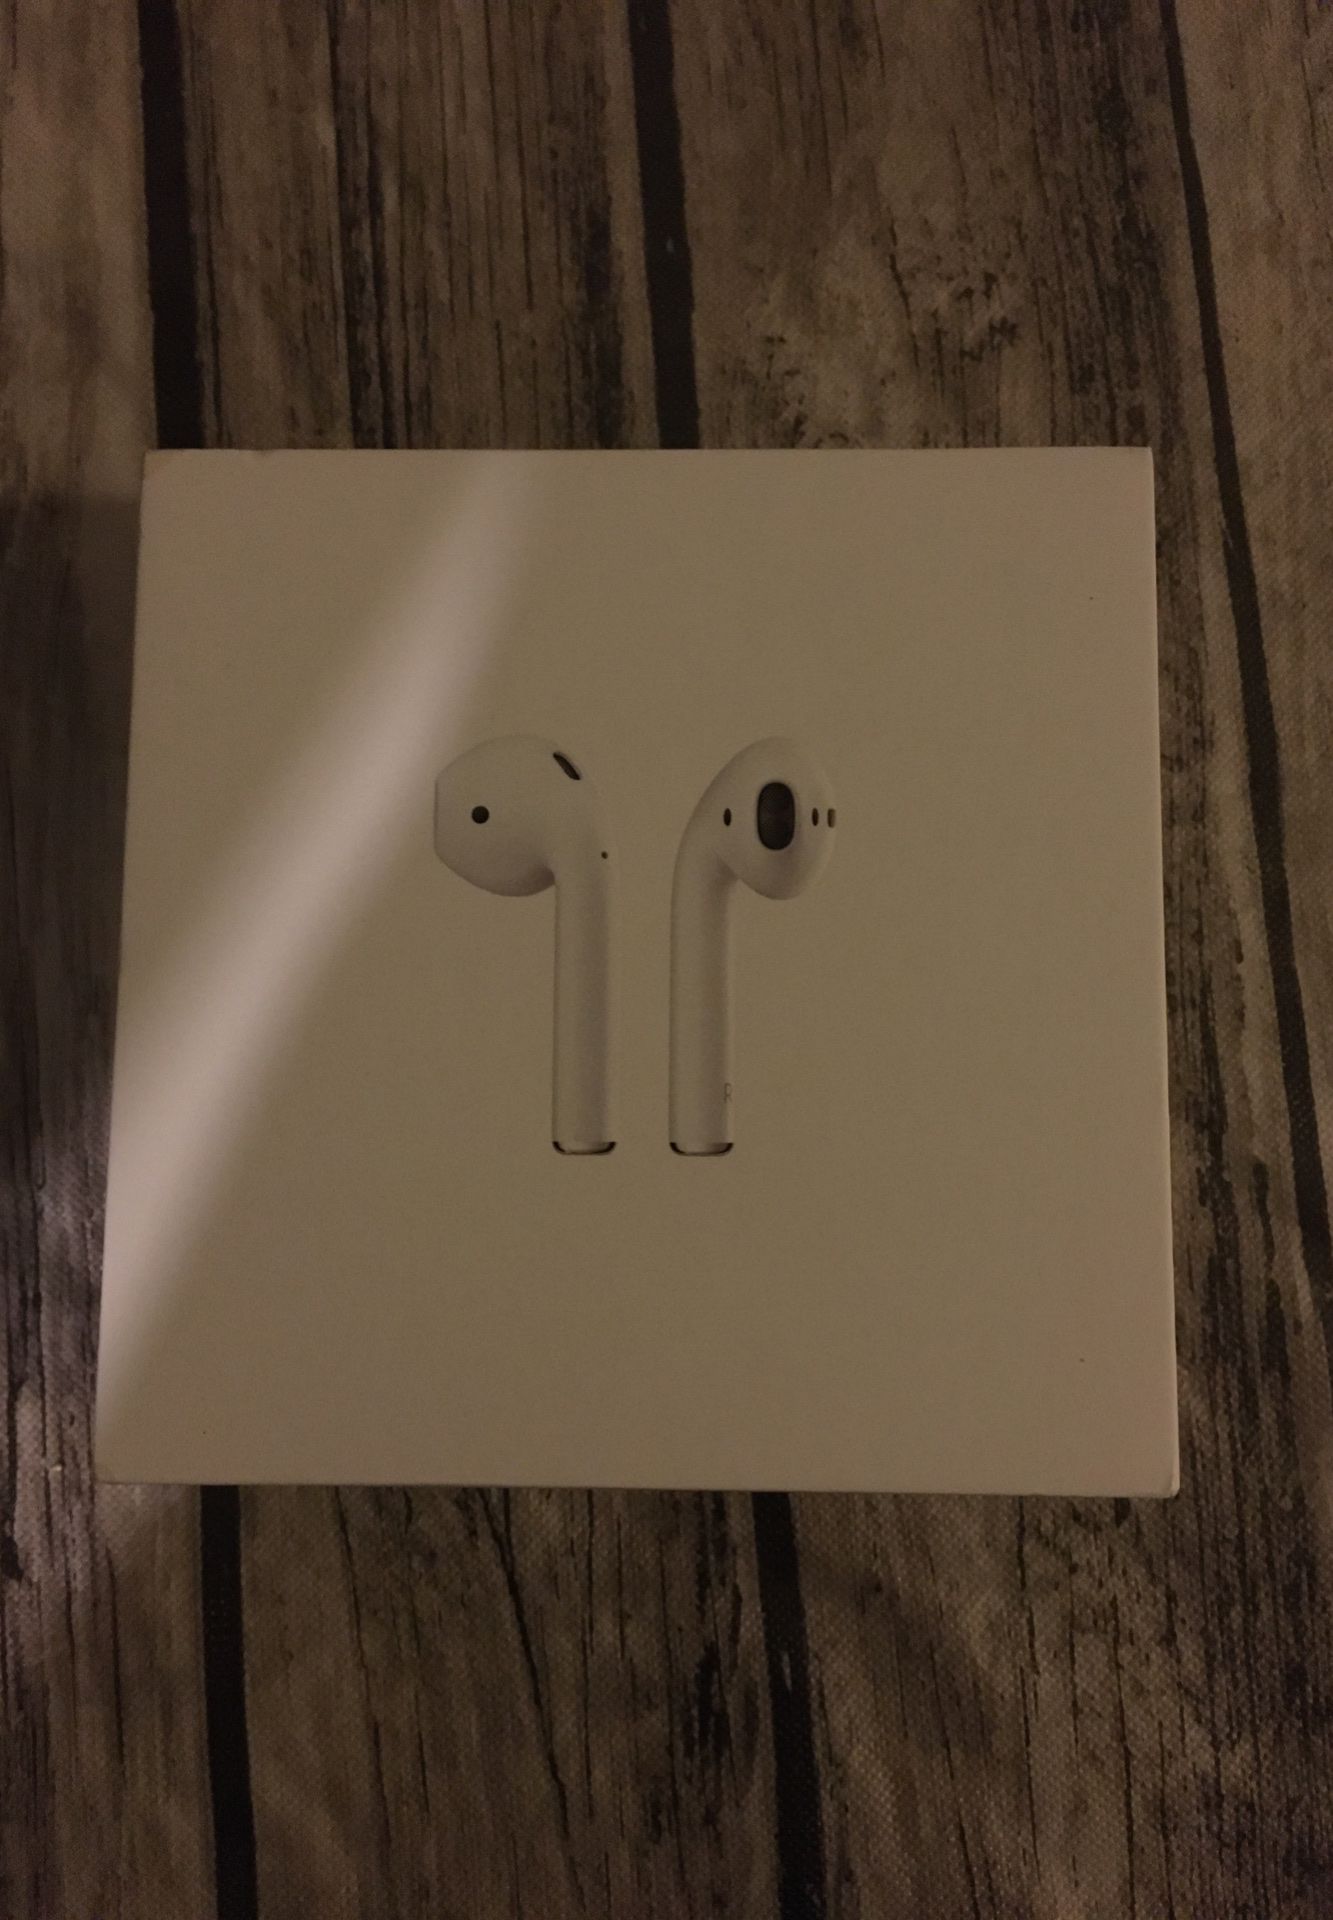 Apple AirPods 2nd generación opened box never used need gone ASAP!!